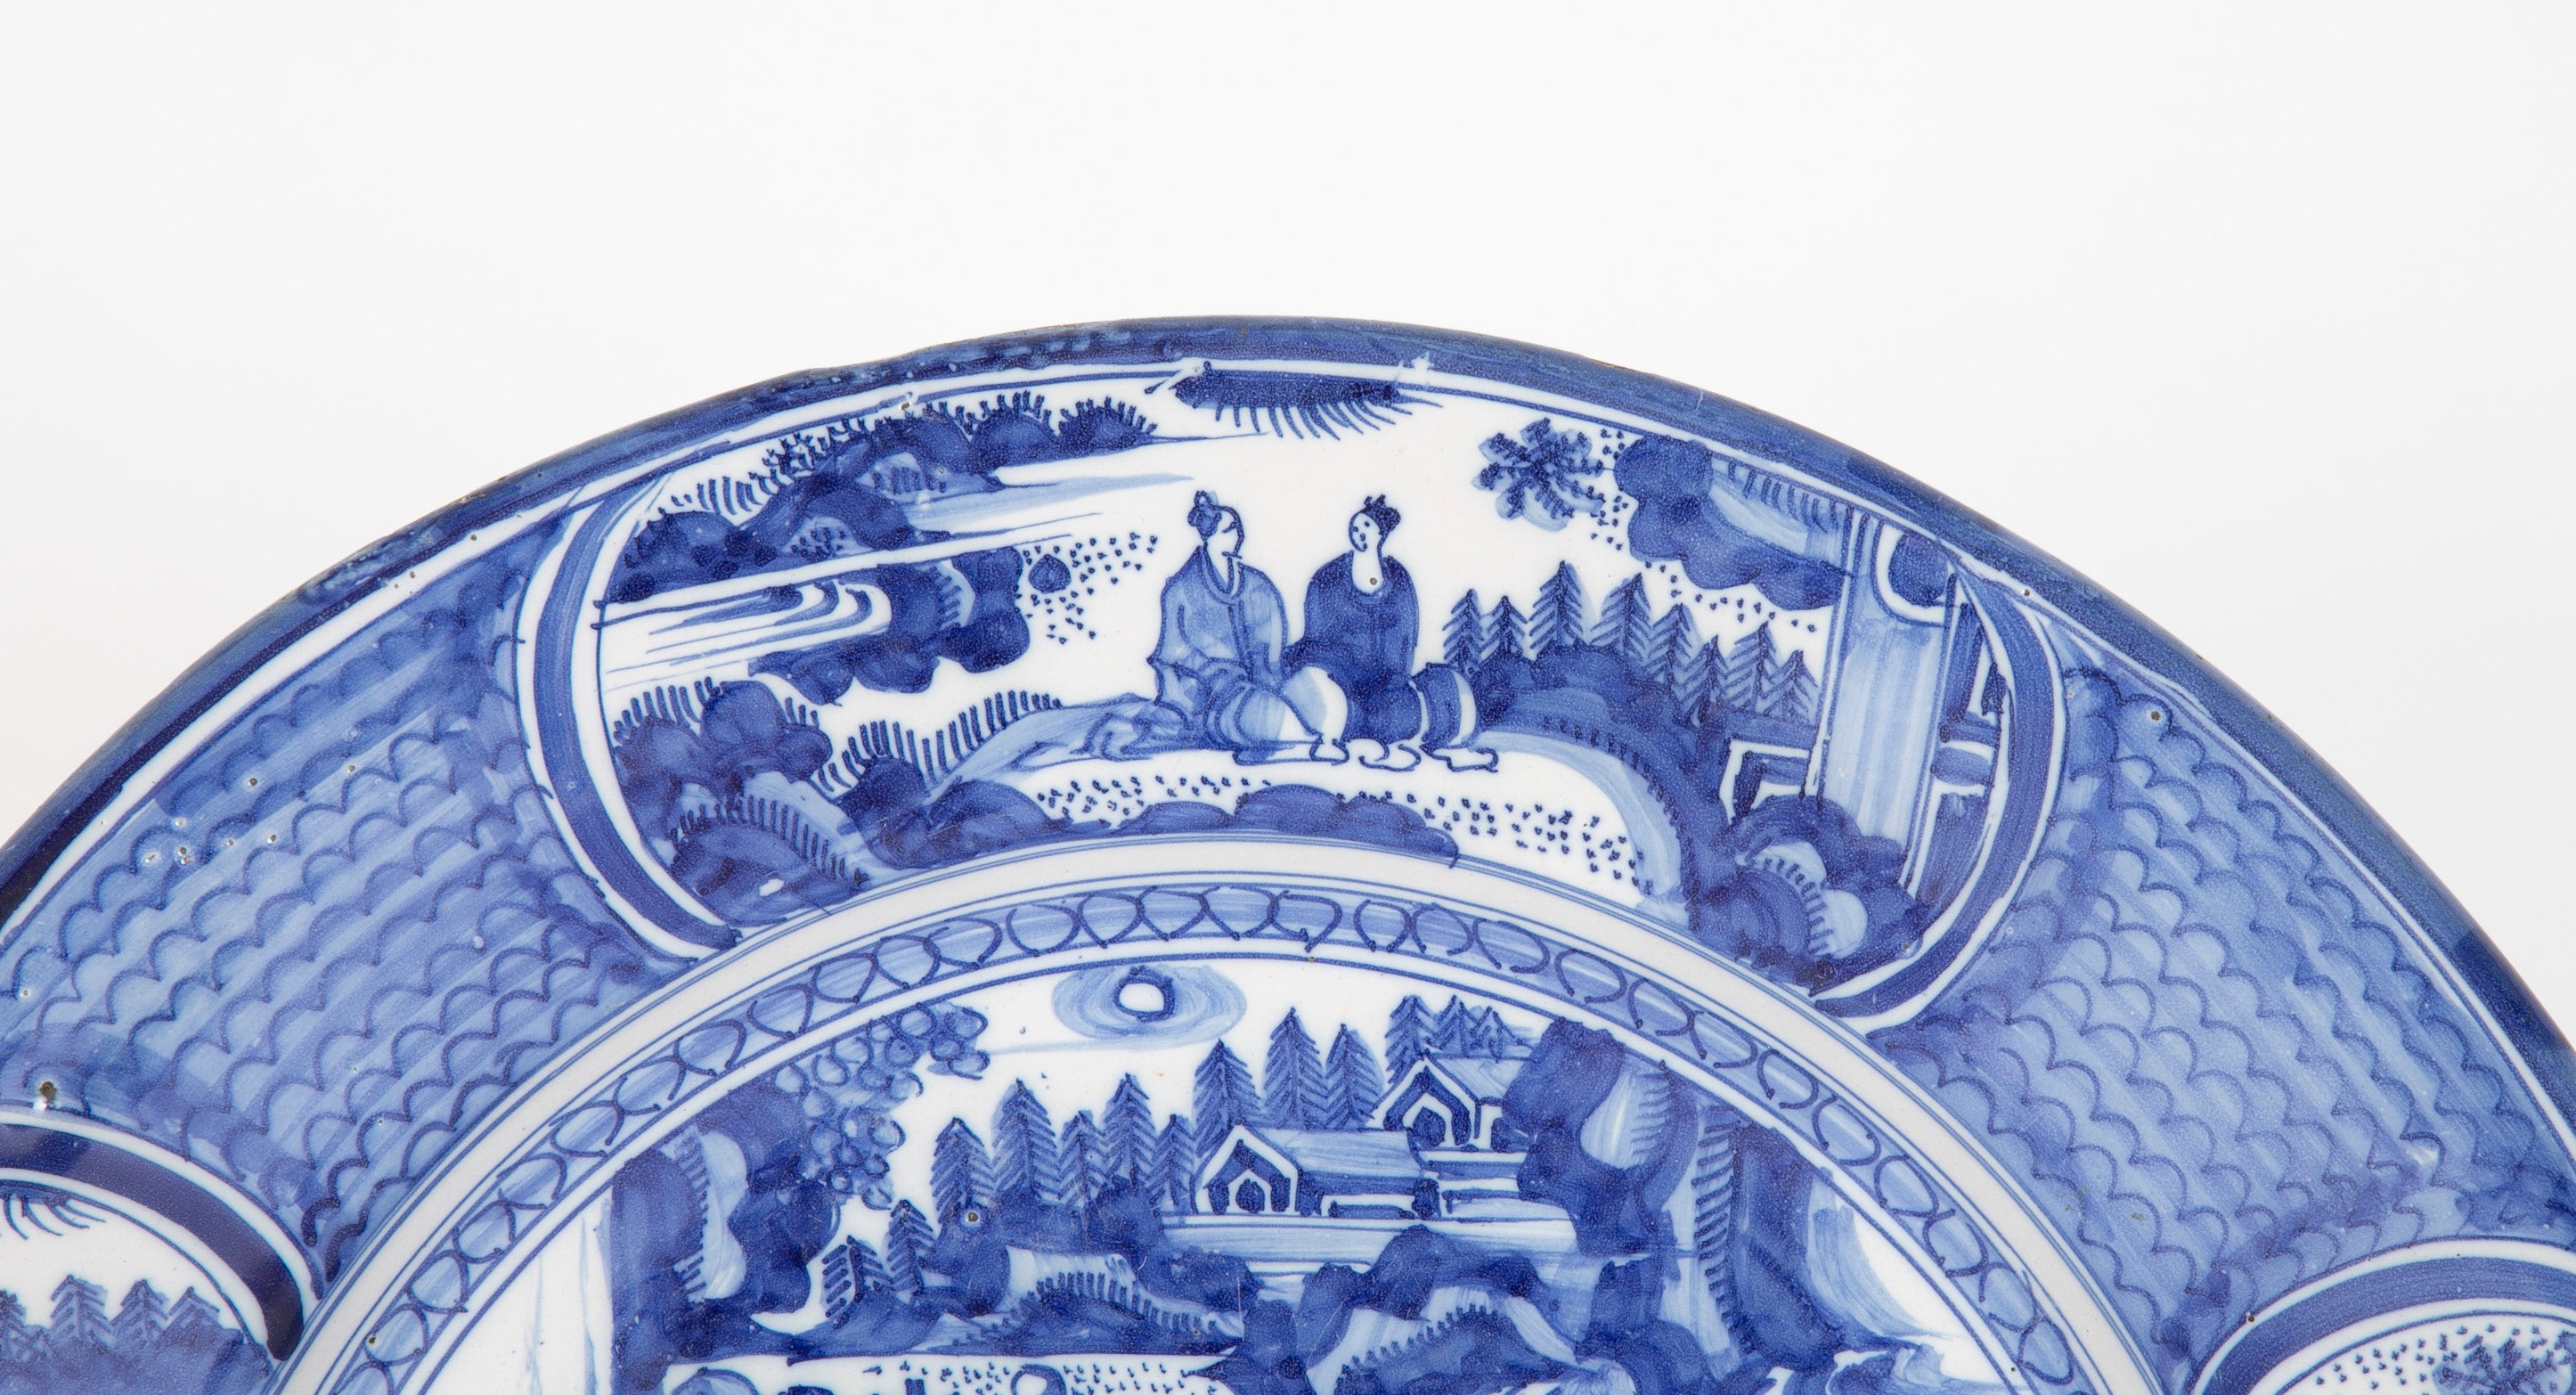 A Pair of 18th Century Delft Blue & White Chargers